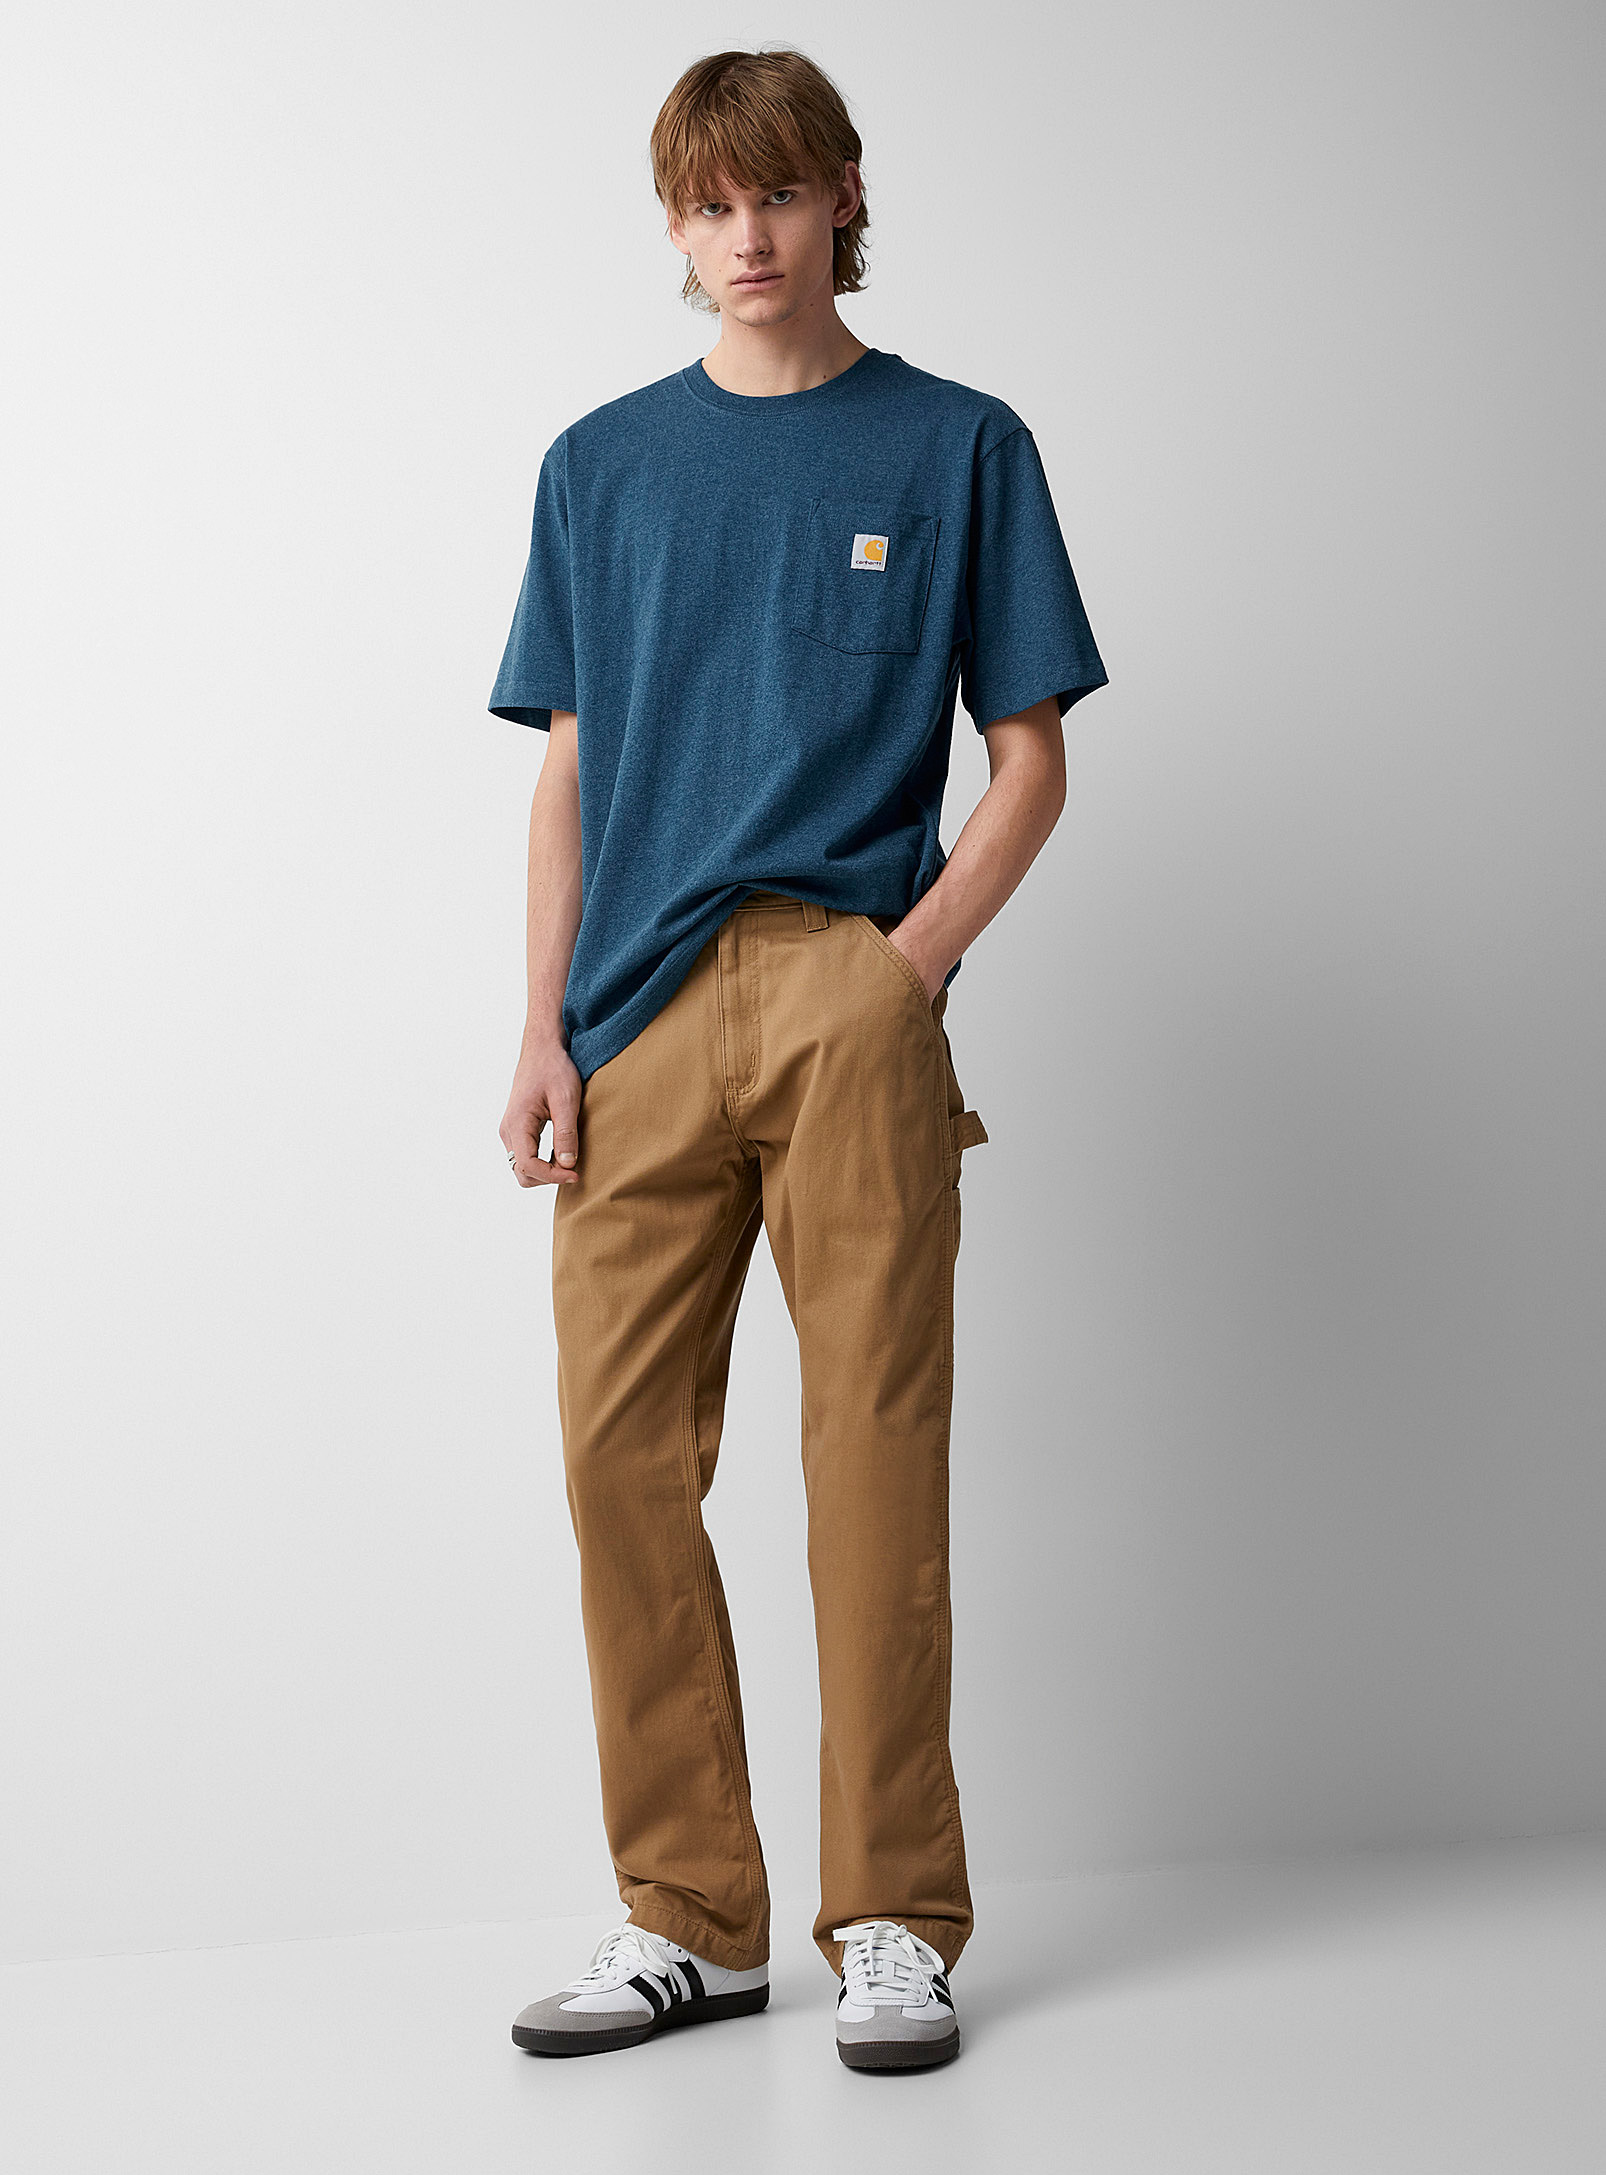 Carhartt Twill Utility Work Pant Relaxed Fit In Sand